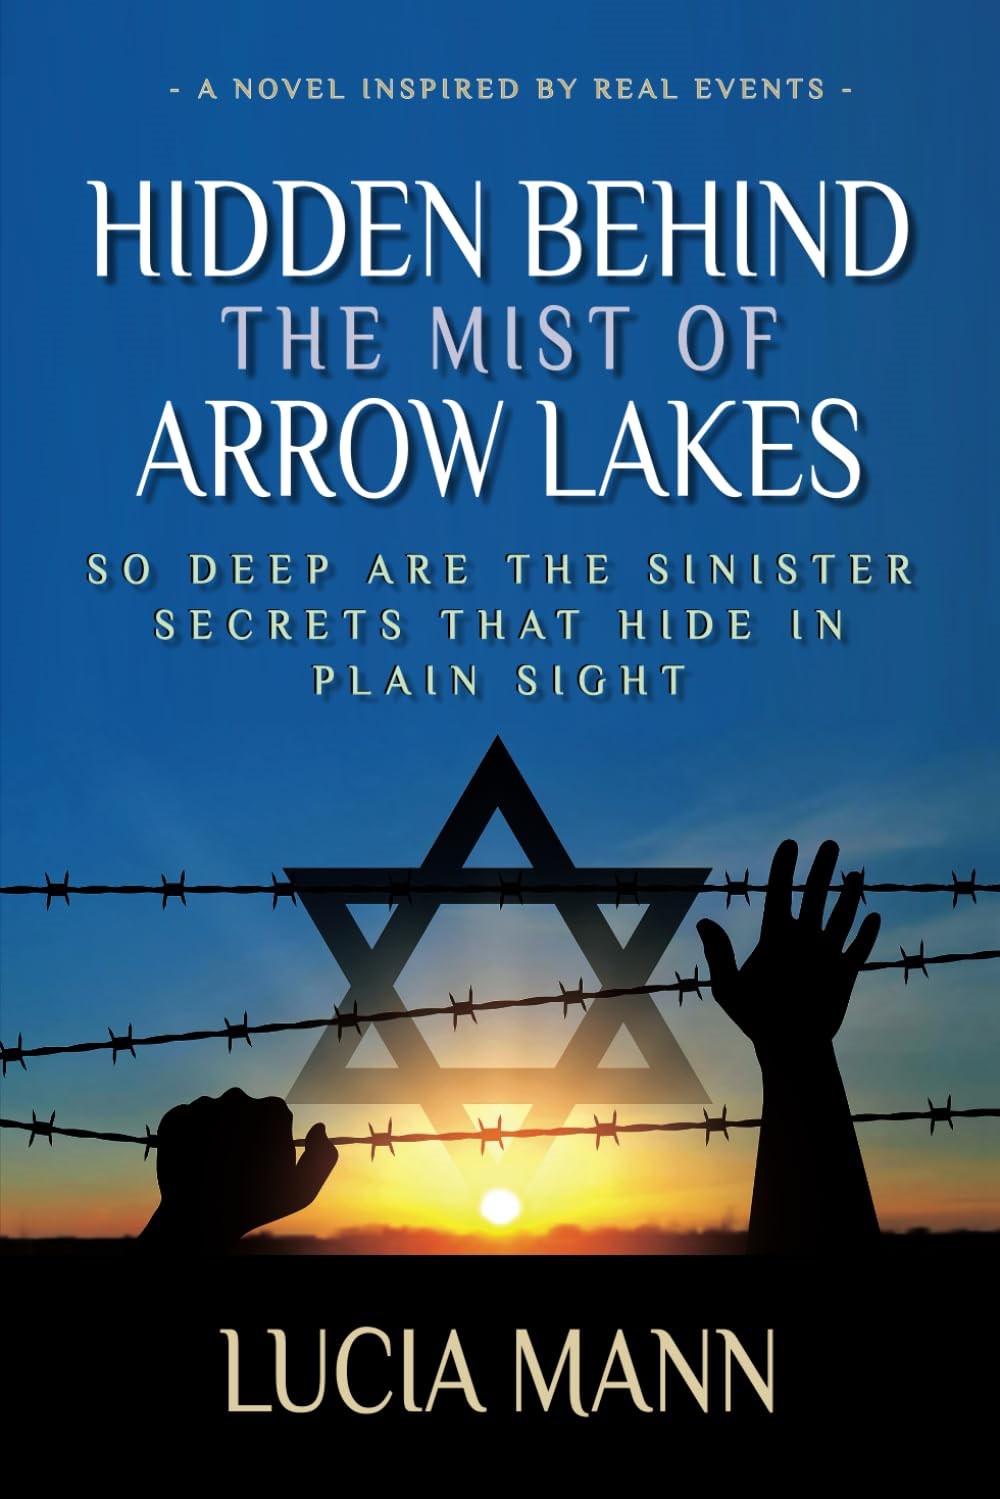 New Book Unveils Dark Secrets: Hidden Behind the Mist of Arrow Lakes Sheds Light on Nazi Era Identities and Holocaust Connections